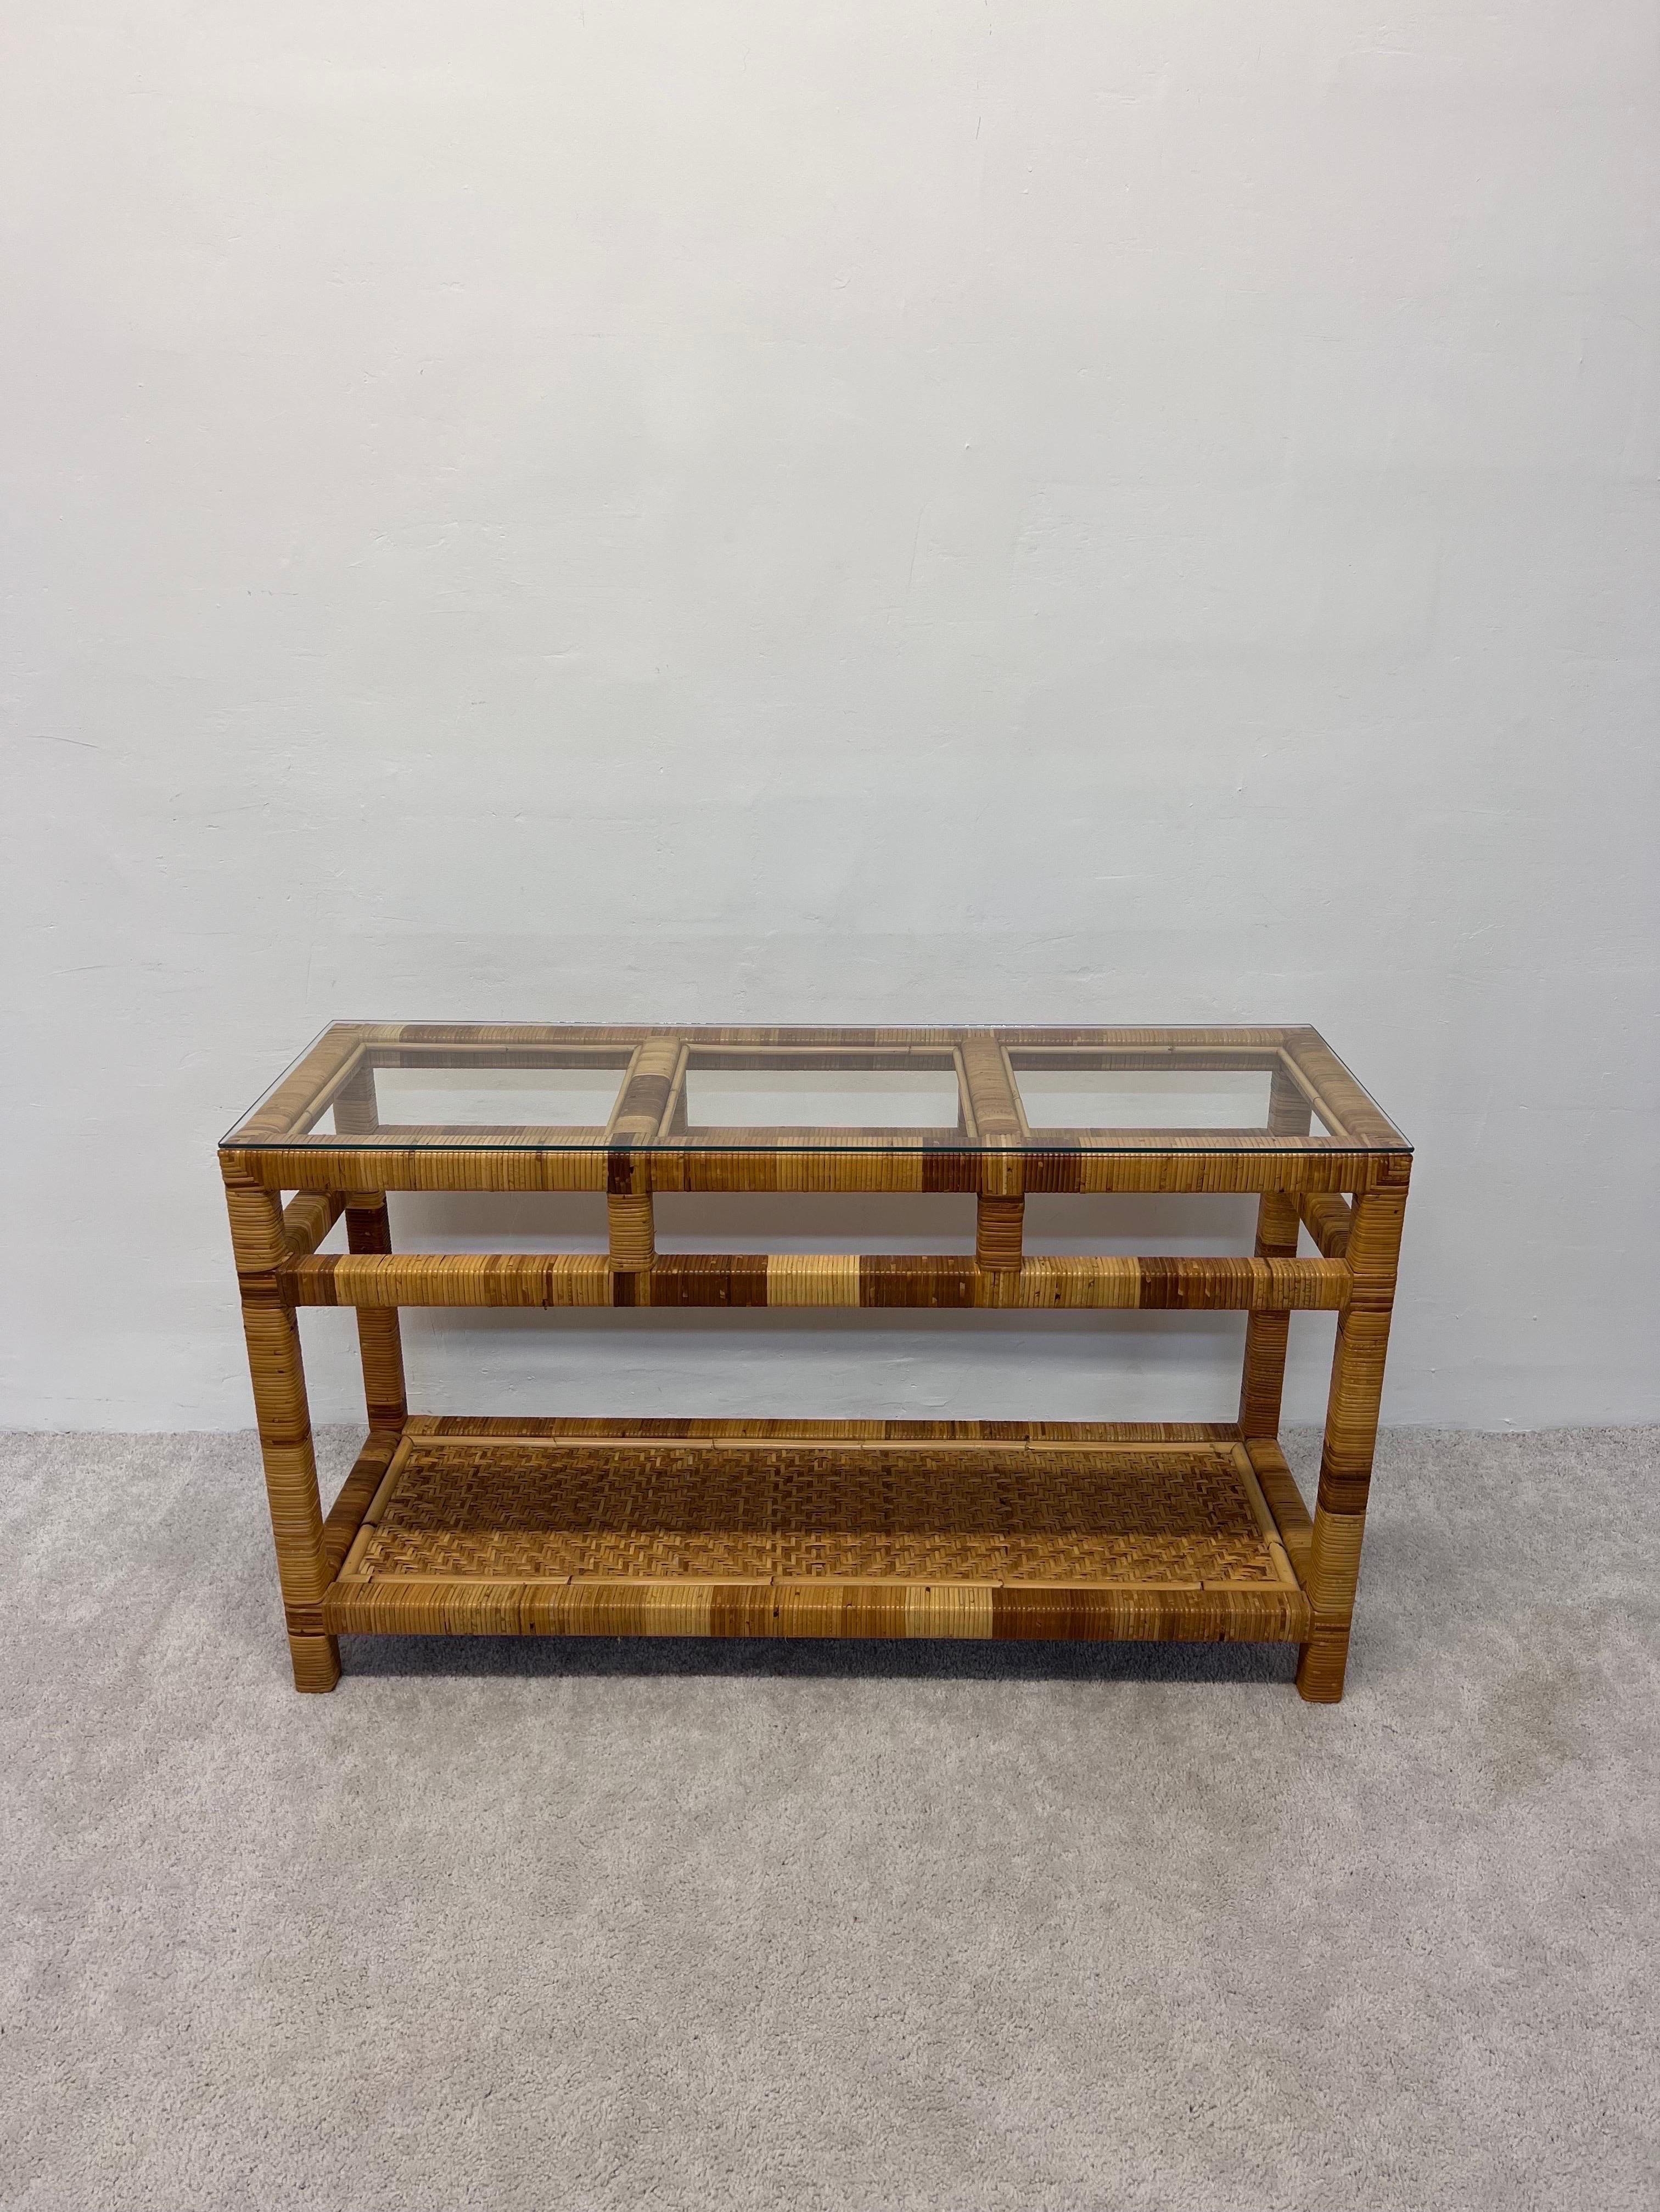 Woven rattan console table with glass top from the 1970s. The lower shelf has a rattan chevron pattern and top shelf is 1/4